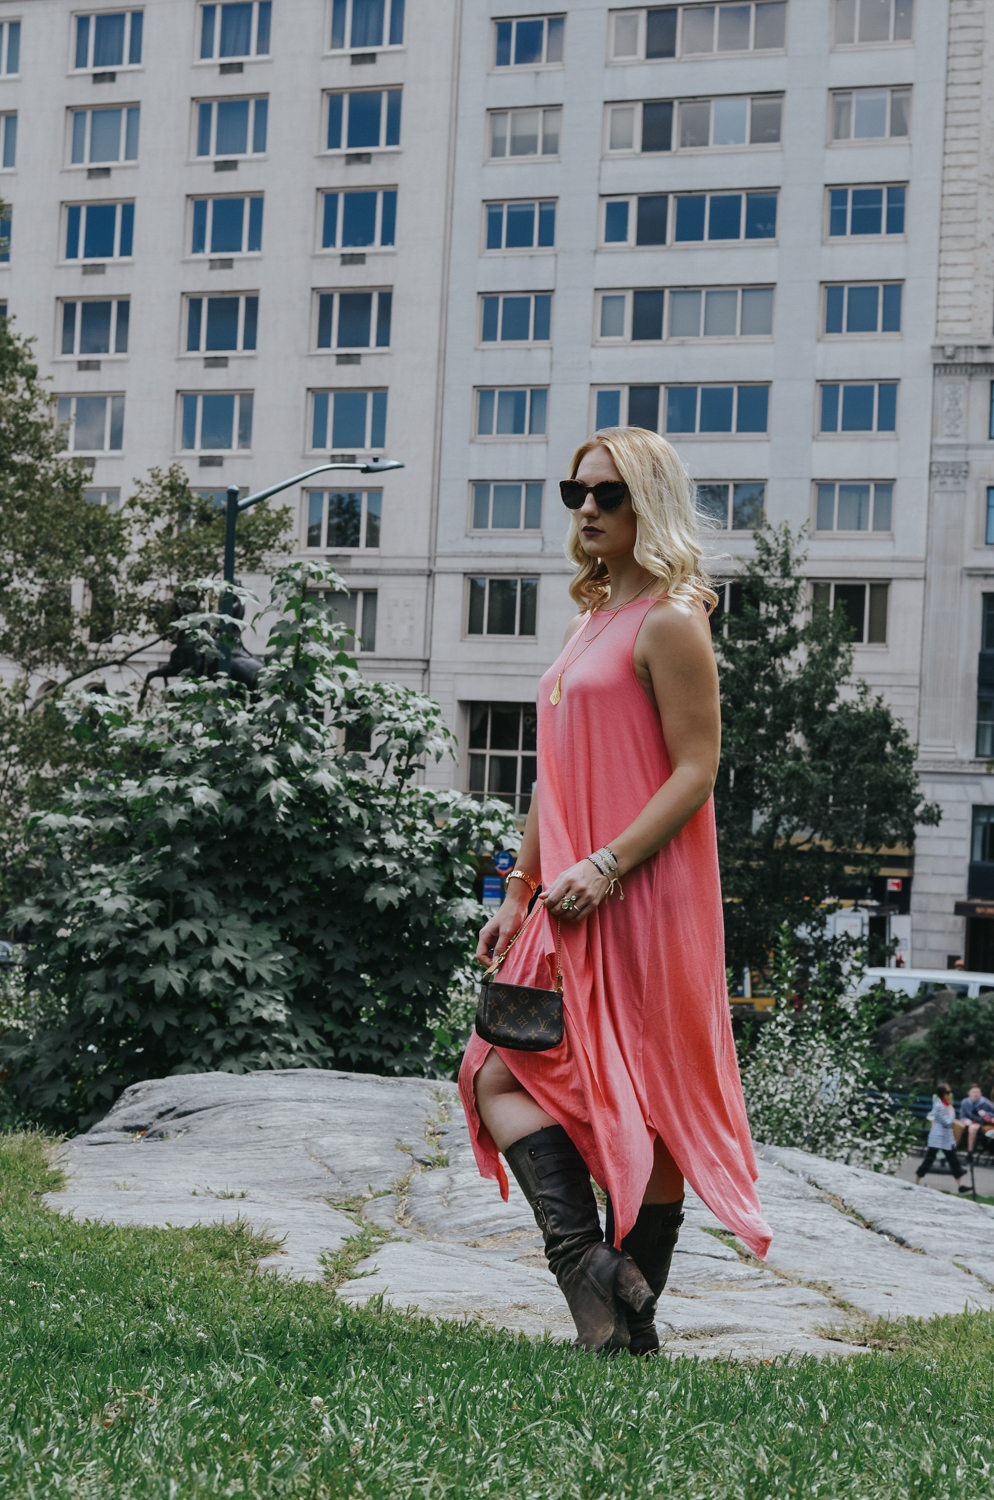 New York Fashion Week Look: Coral Maxi Dress and Knee High Boots - the perfect summer to fall transition look.